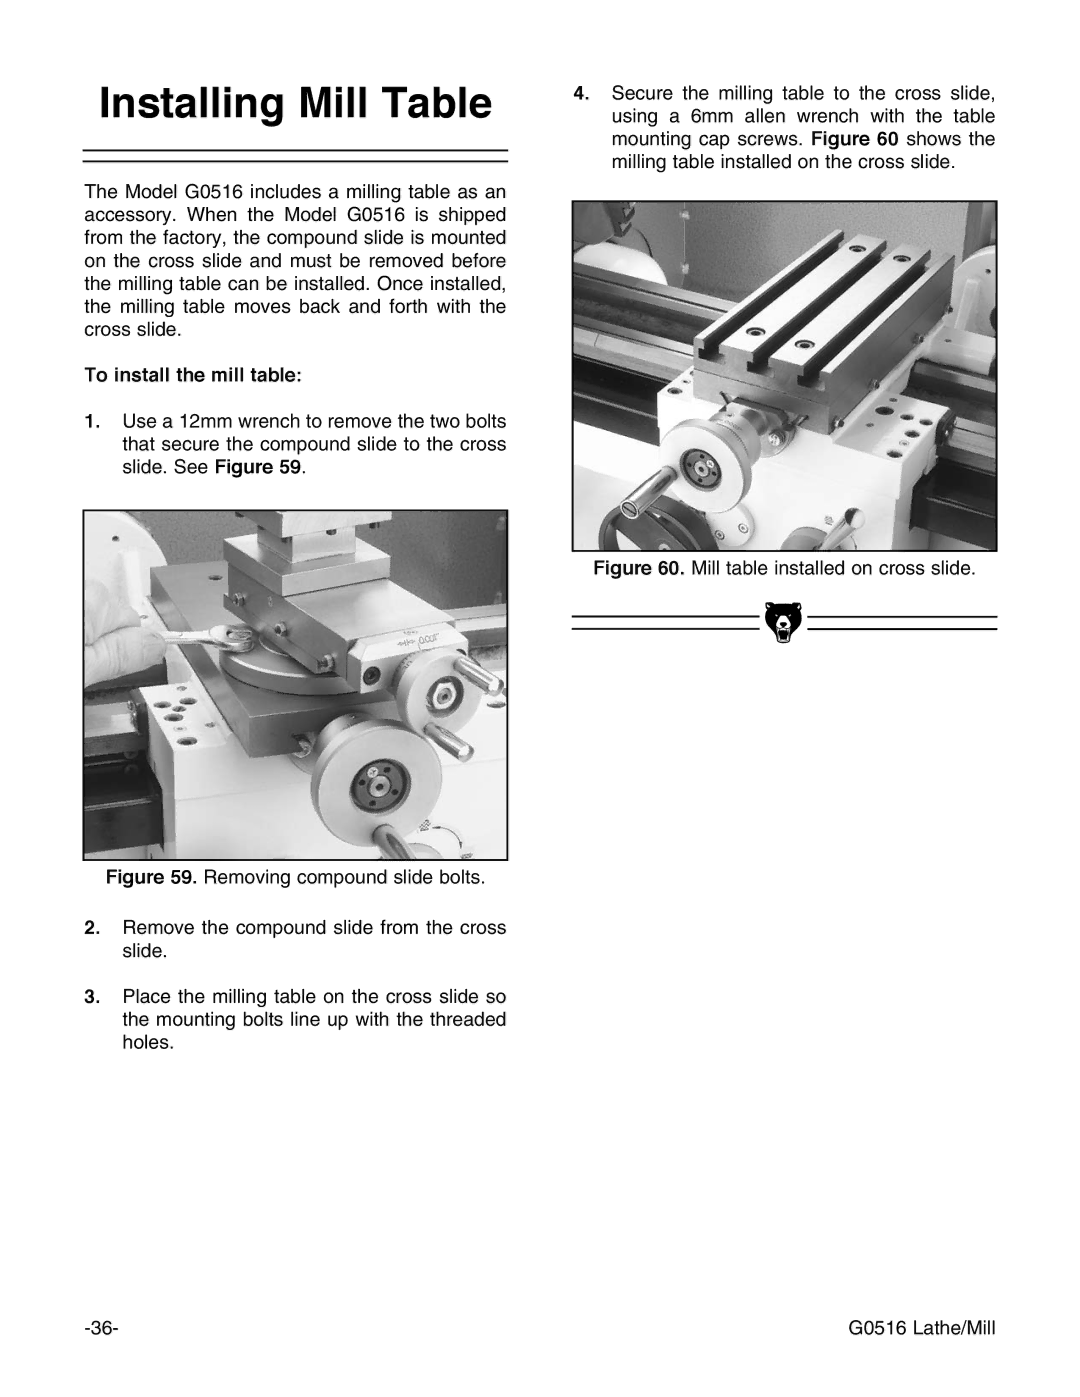 Grizzly instruction manual Mill table installed on cross slide G0516 Lathe/Mill 